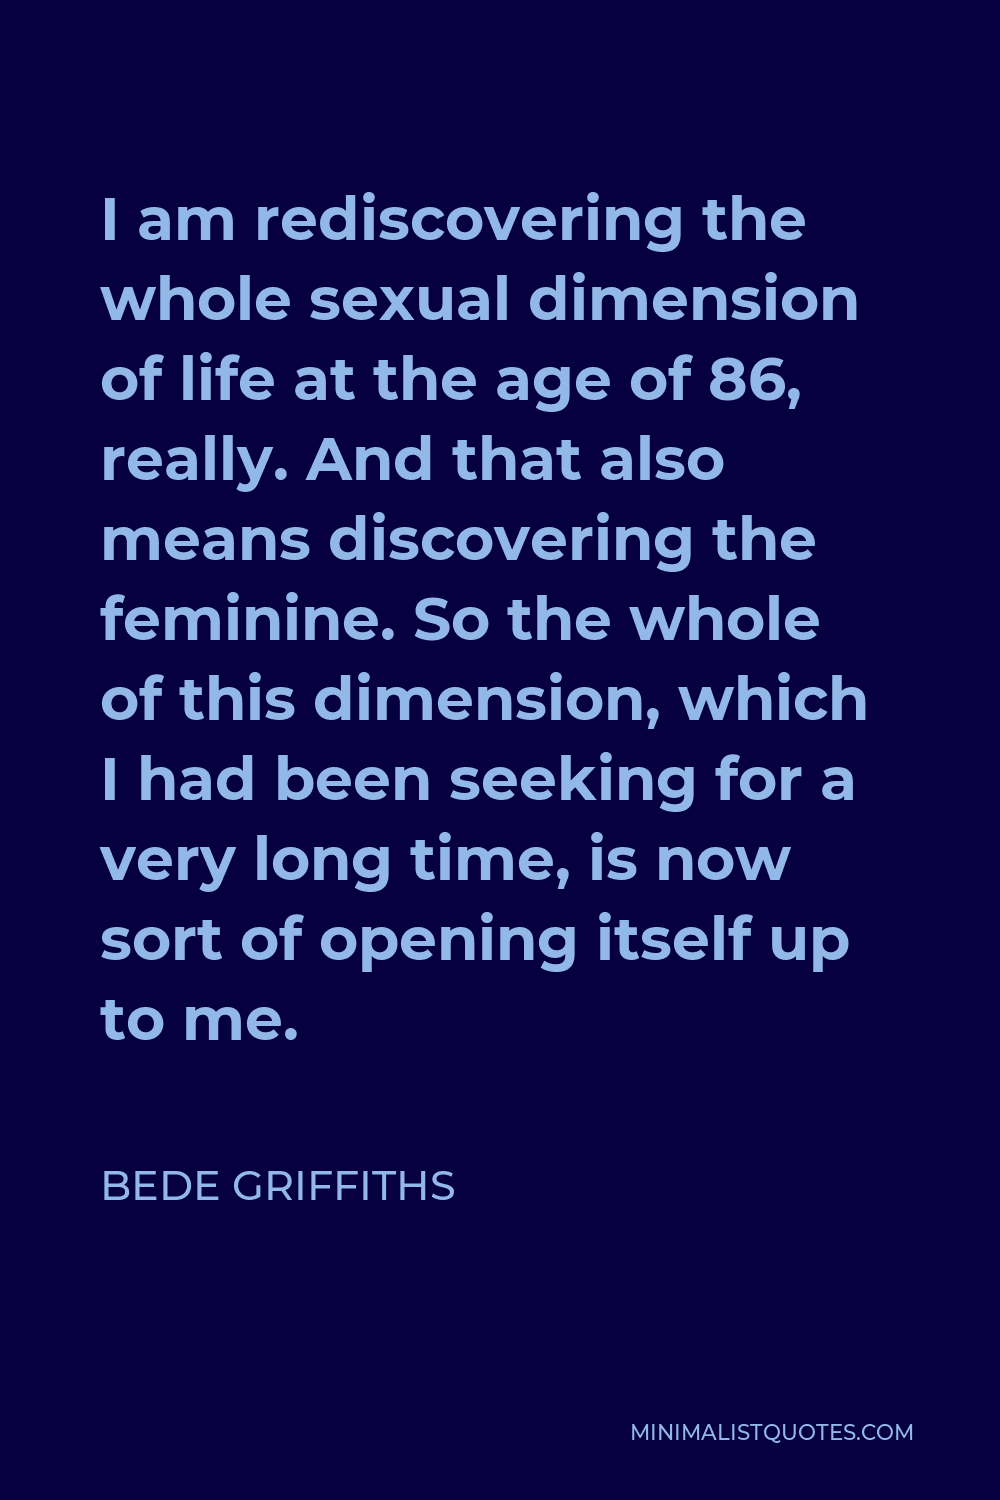 Bede Griffiths Quote - I am rediscovering the whole sexual dimension of life at the age of 86, really. And that also means discovering the feminine. So the whole of this dimension, which I had been seeking for a very long time, is now sort of opening itself up to me.